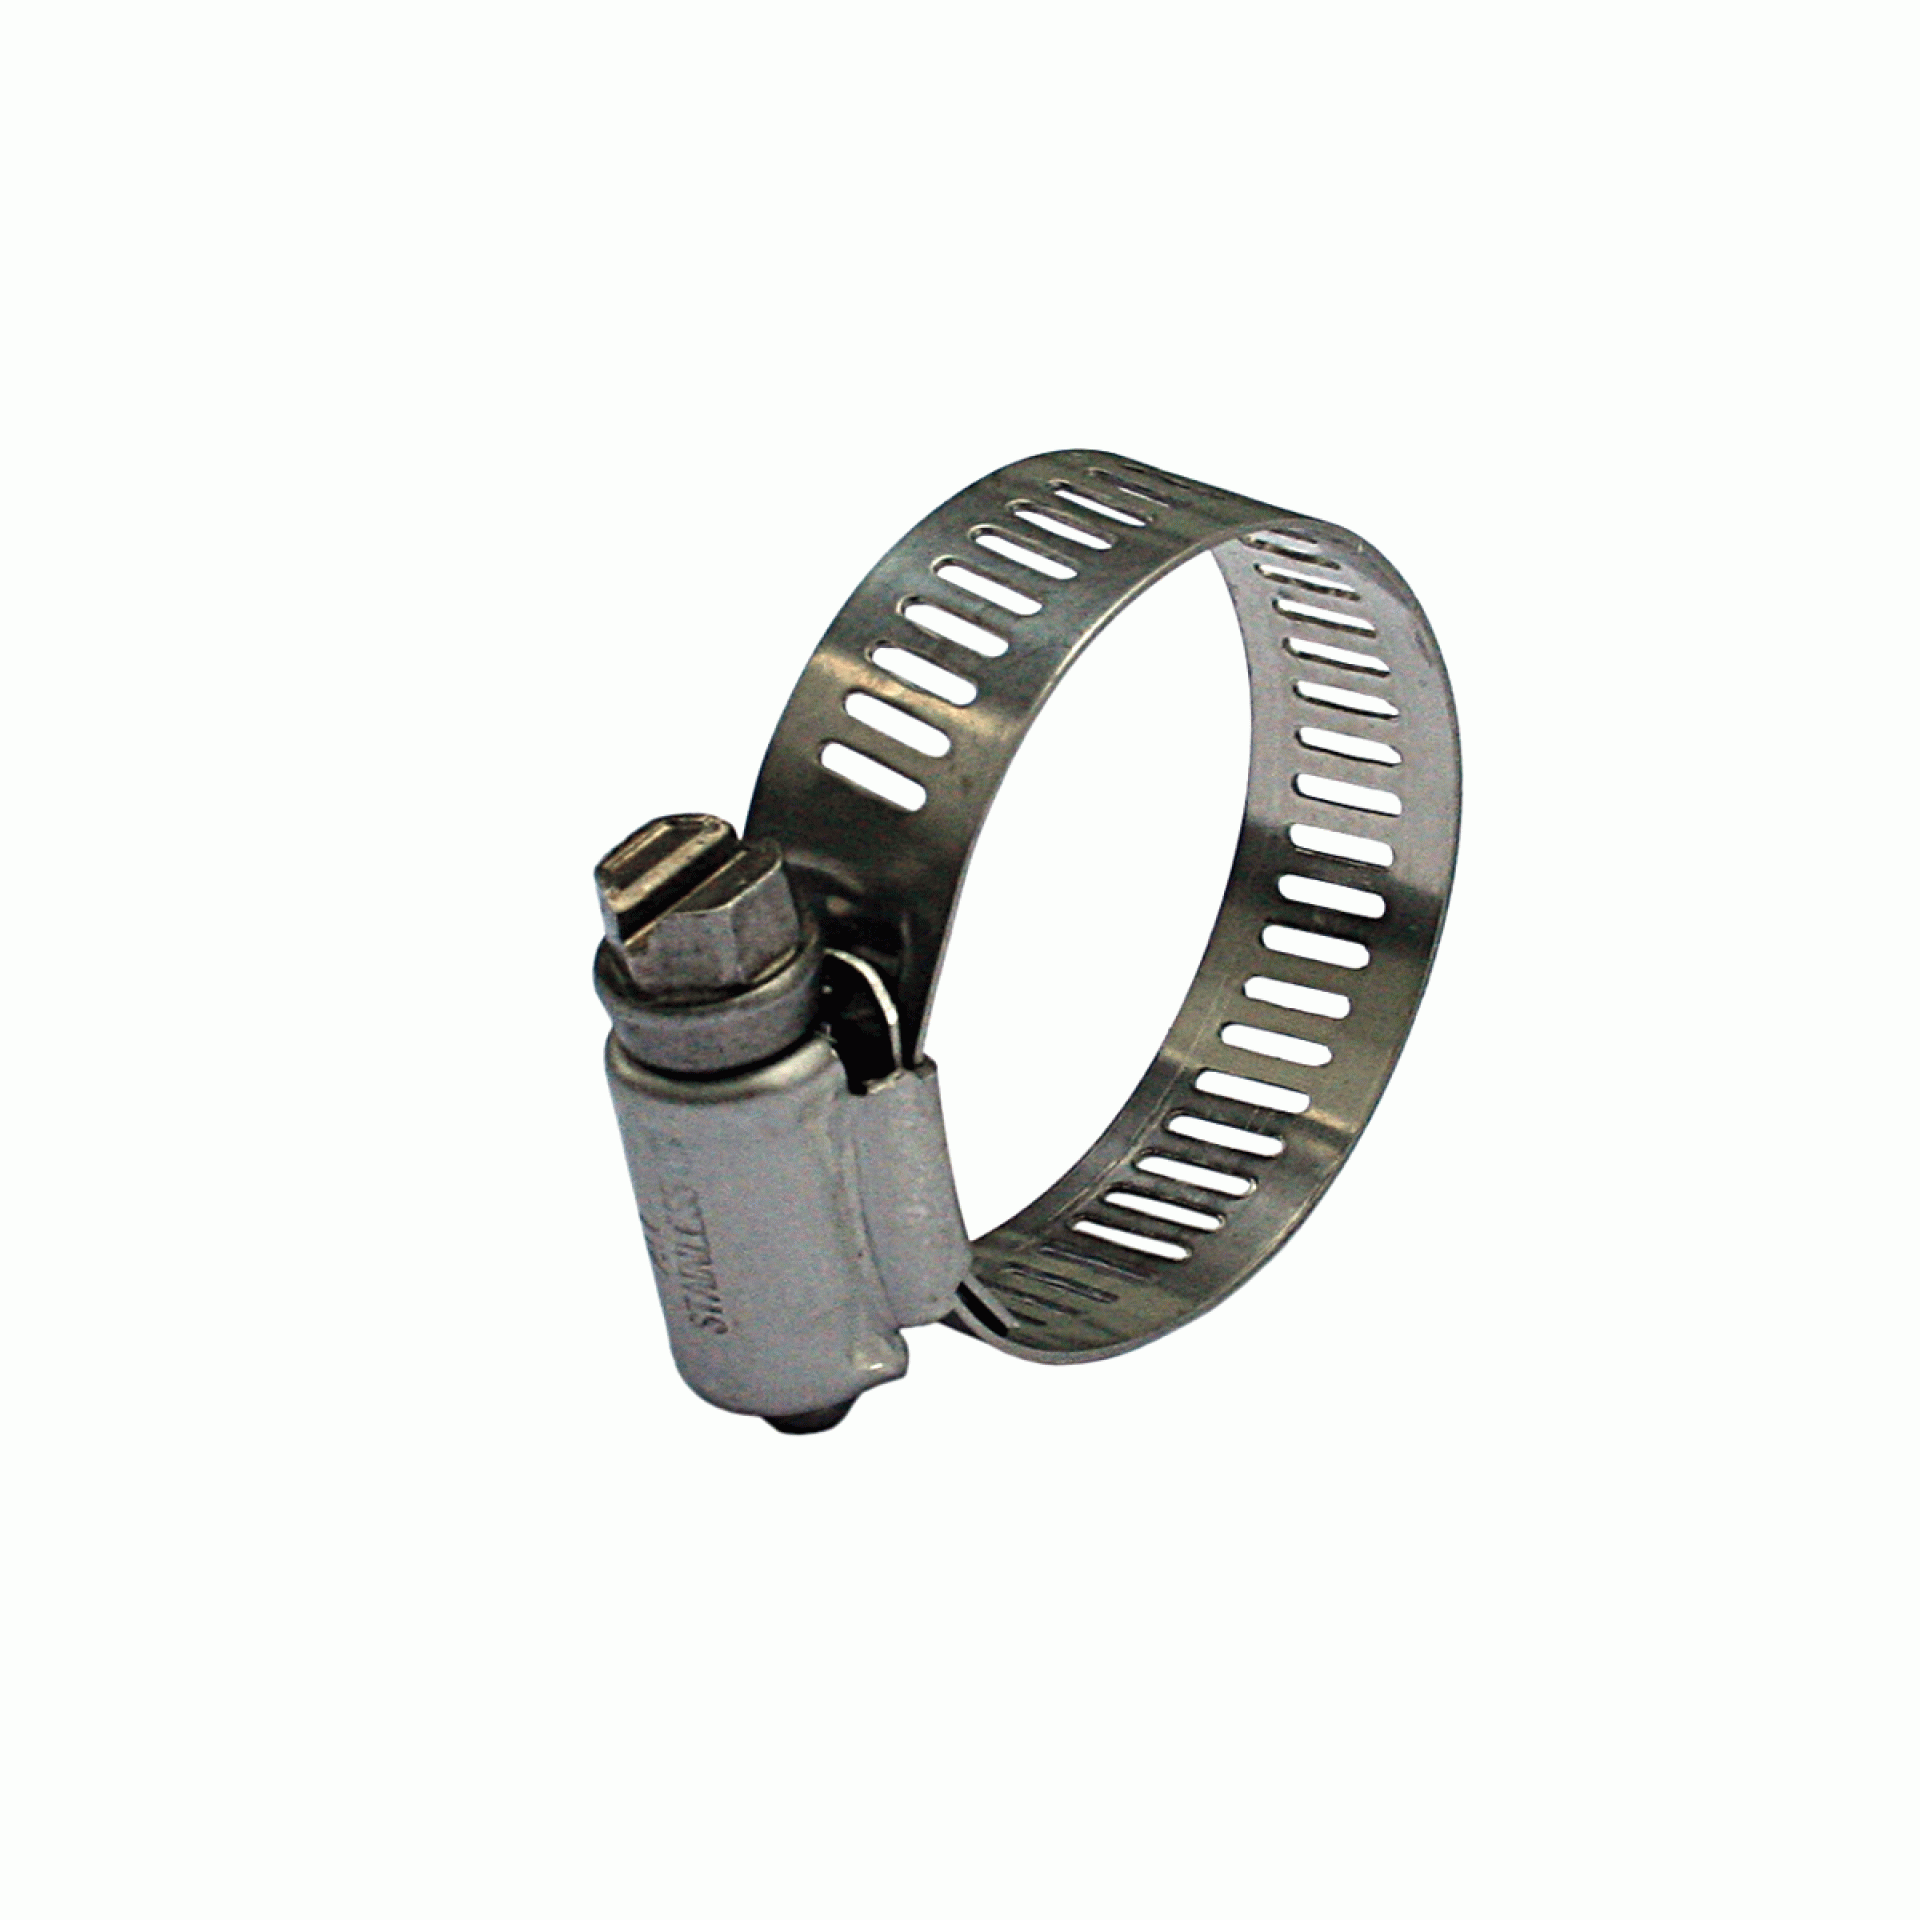 DUPAGE PRODUCTS GROUP | B36HS | DIA. MIN. 1-3/16" MAX. 2-3/4" FITS HOSE: 1-3/4" TO 2-1/4"